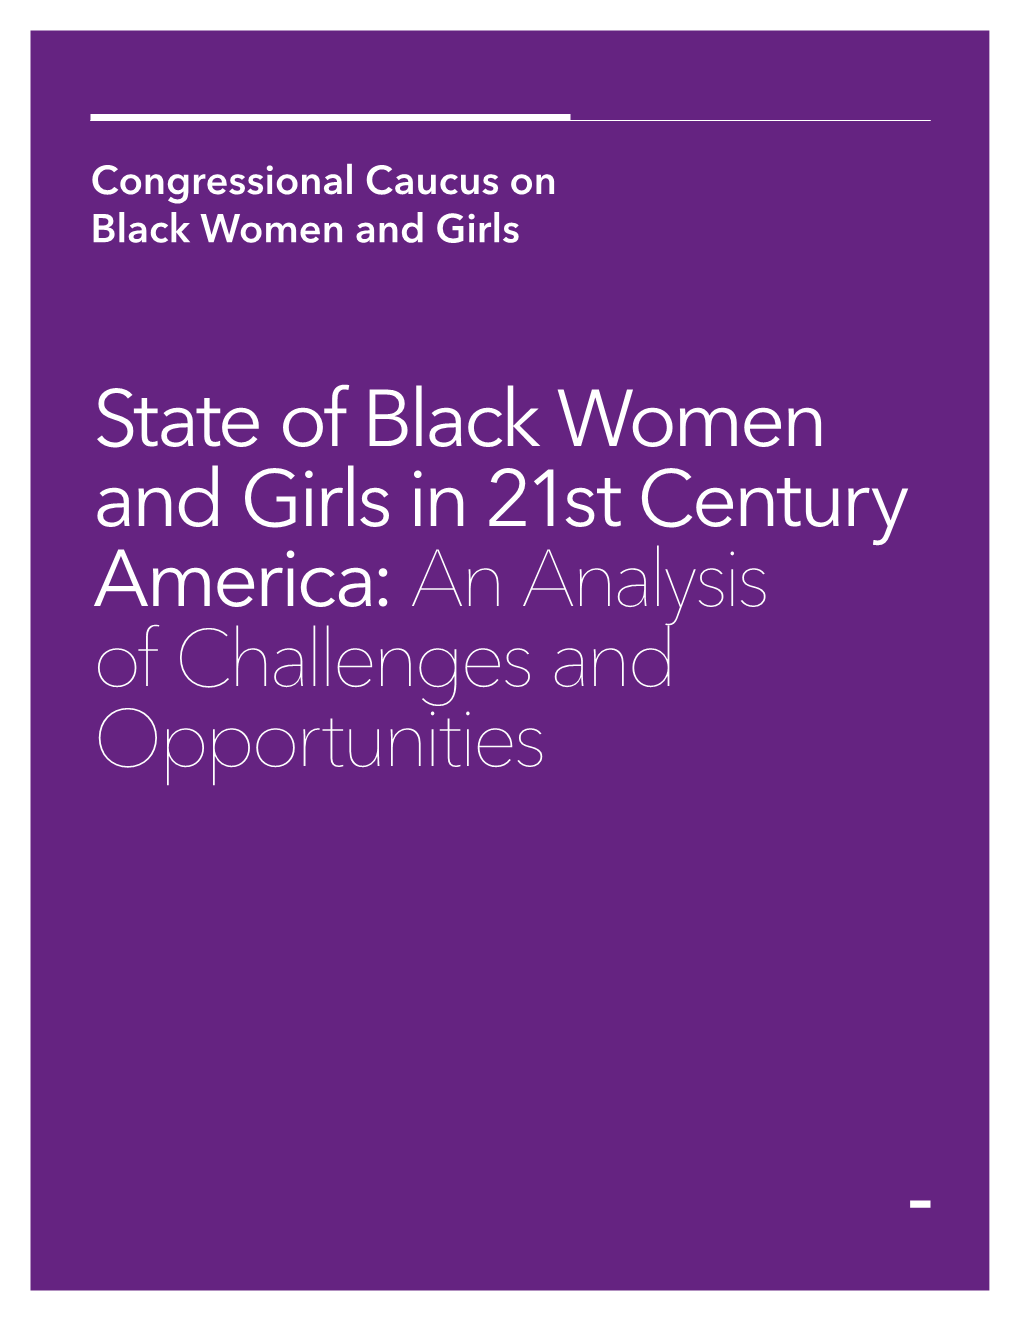 State of Black Women and Girls in 21St Century